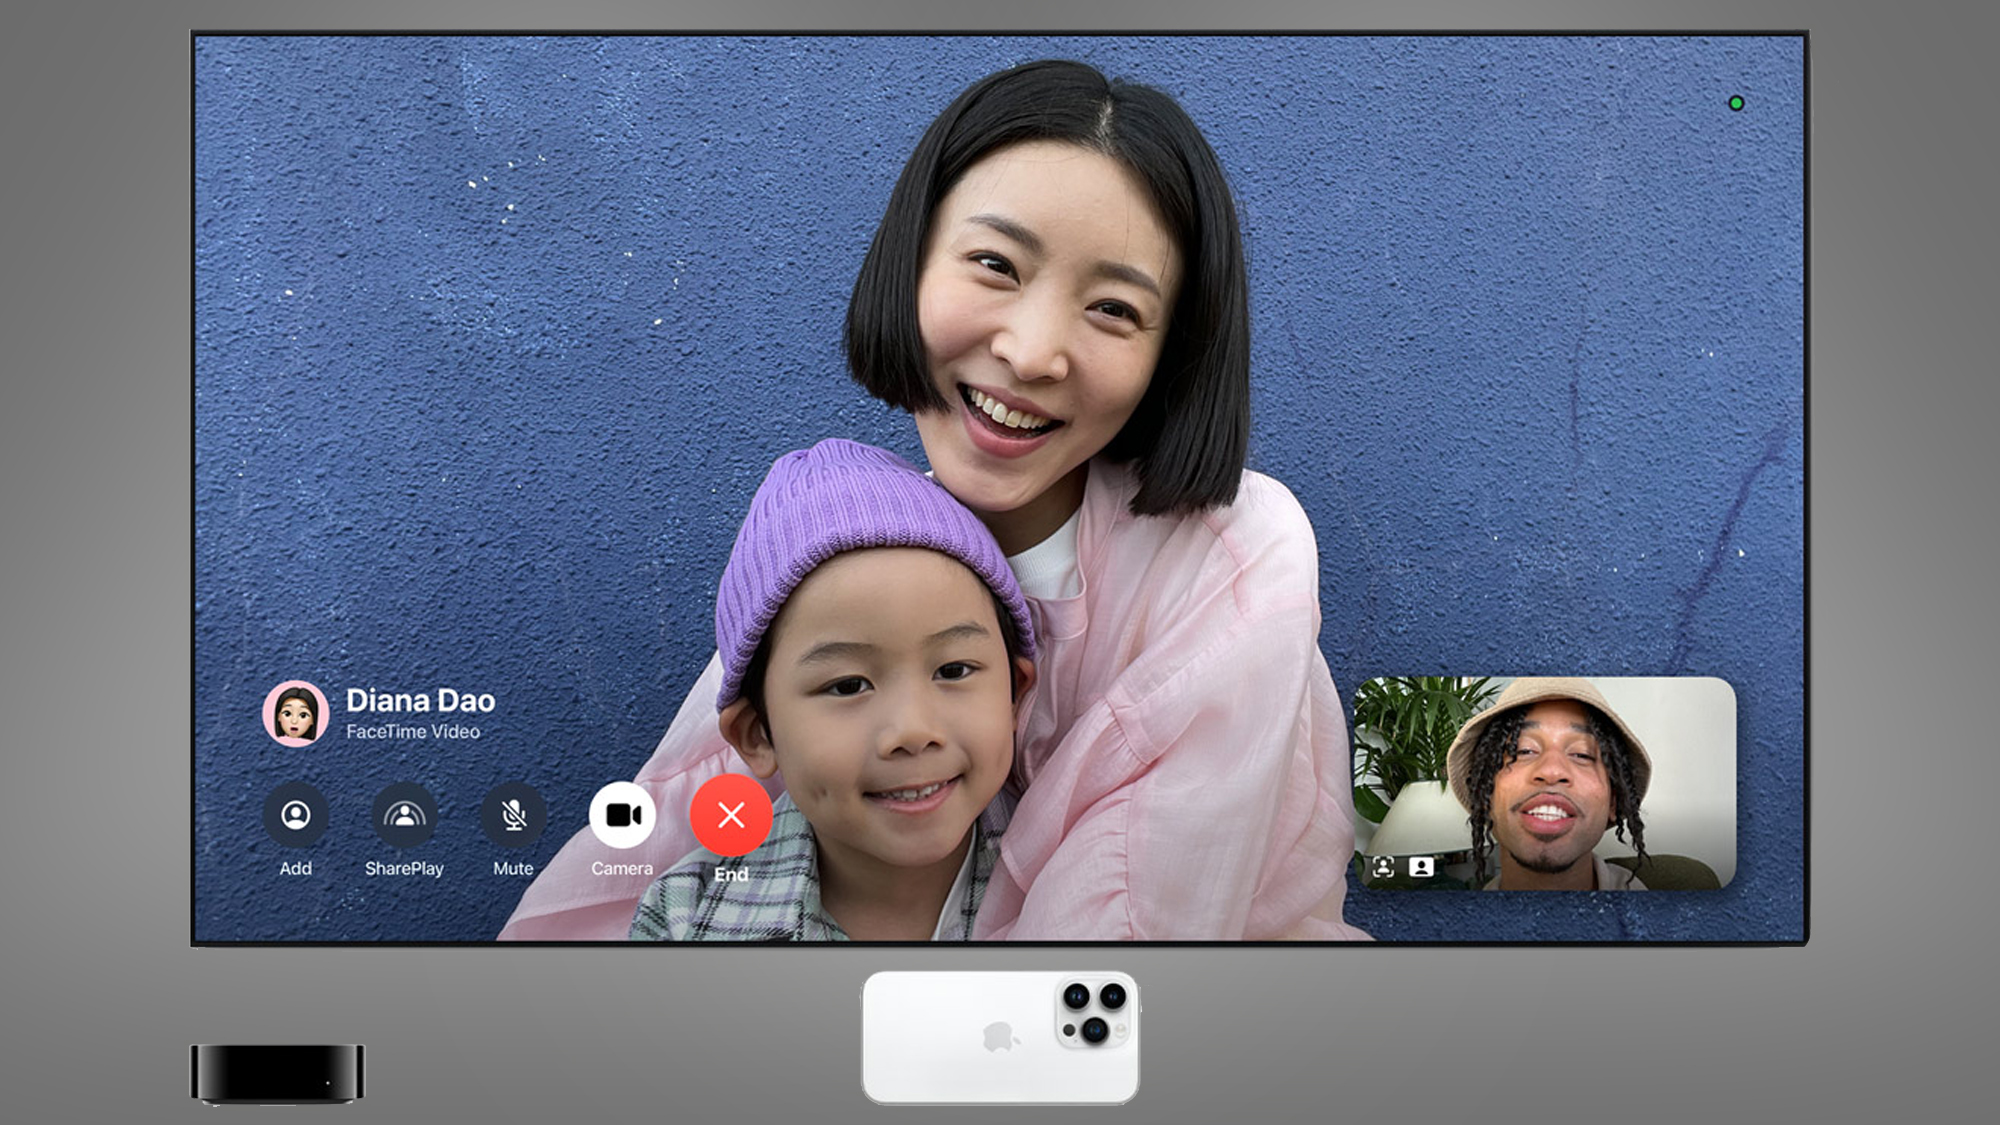 A mother and child in a FaceTime call on a TV screen